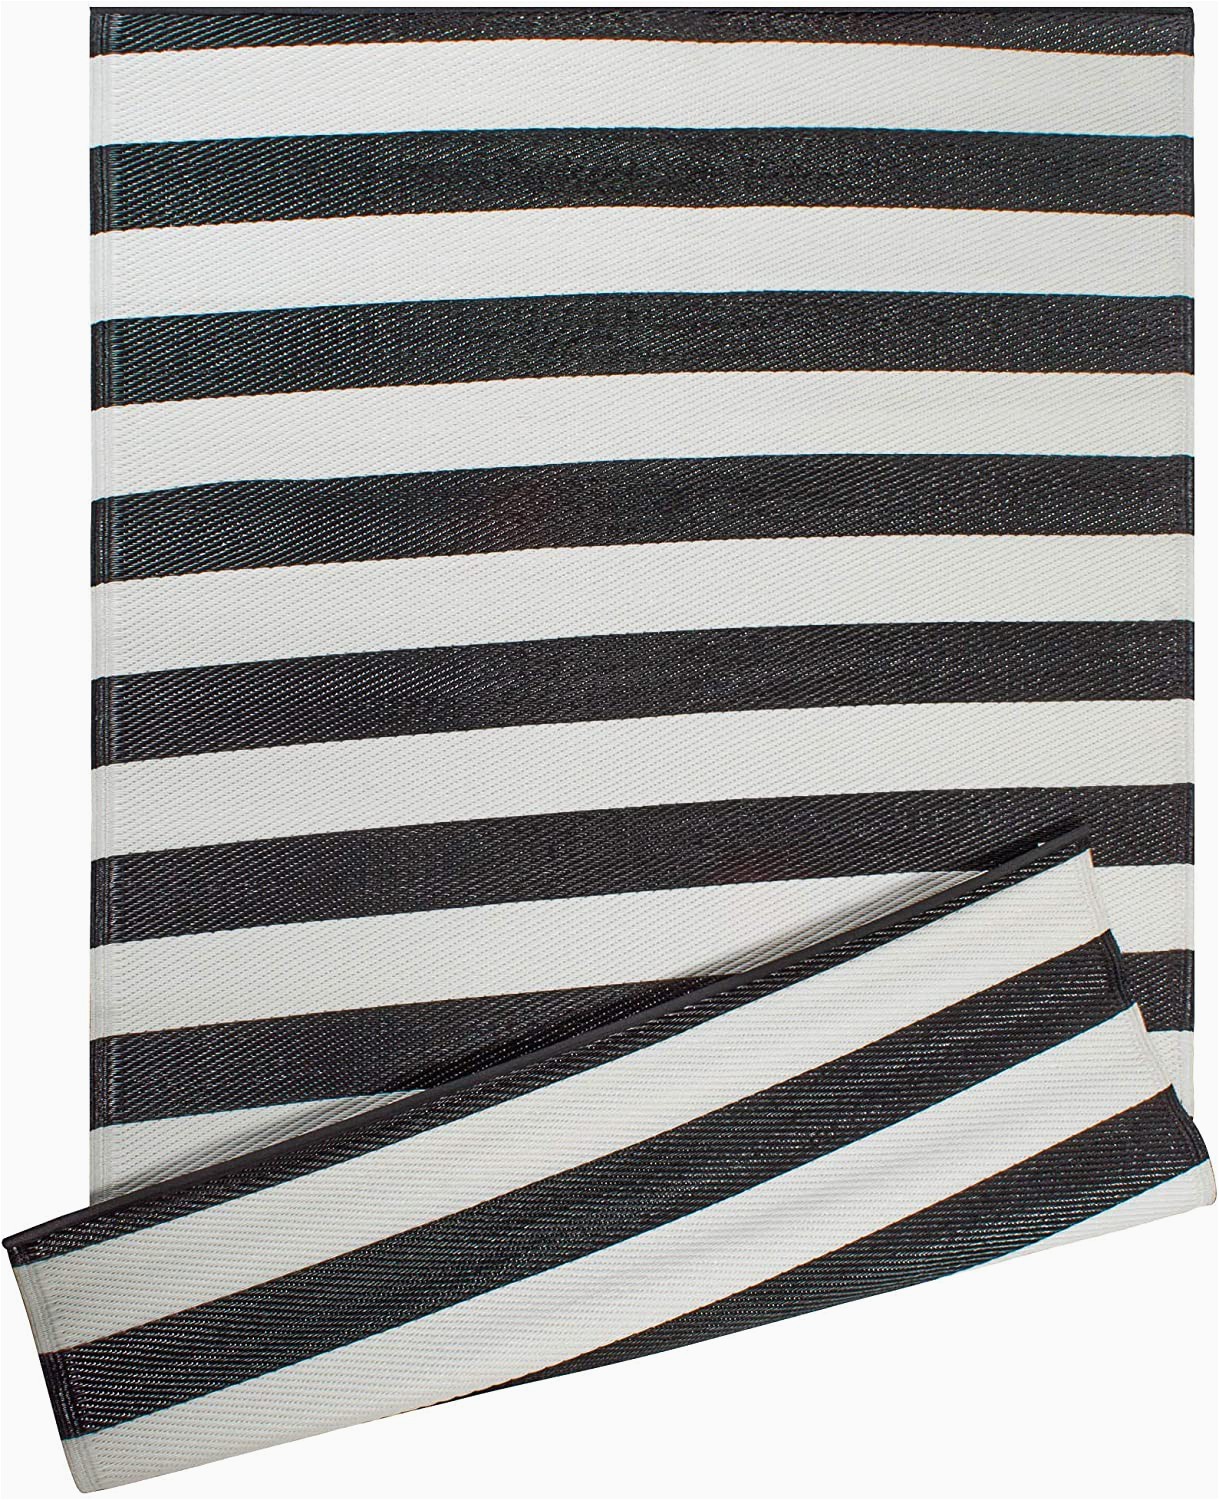 Black and White area Rugs Amazon Dii Reversible Indoor Woven Striped Outdoor Rug 4×6 White & Black